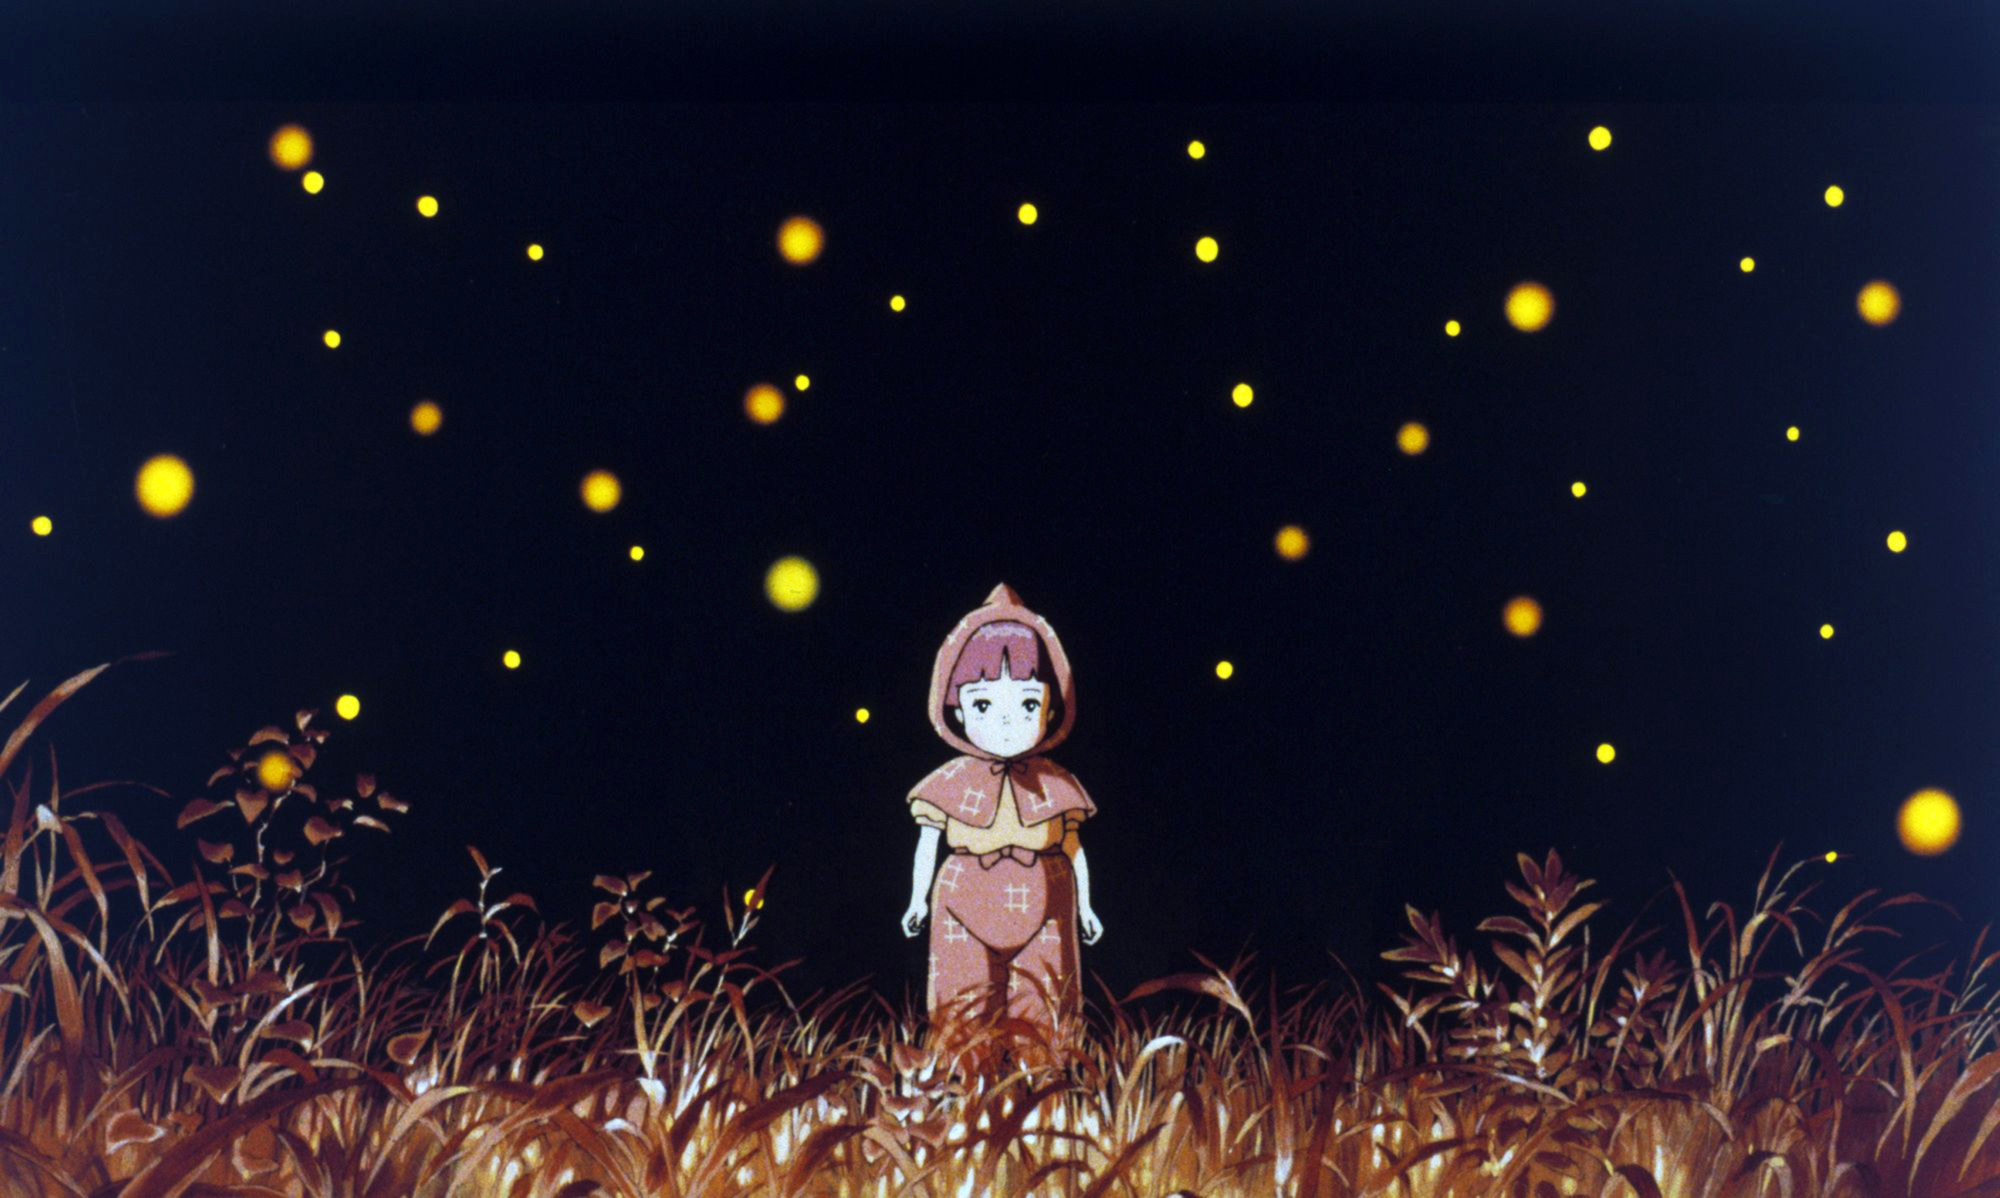 Setsuko standing in a field surrounded by fireflies